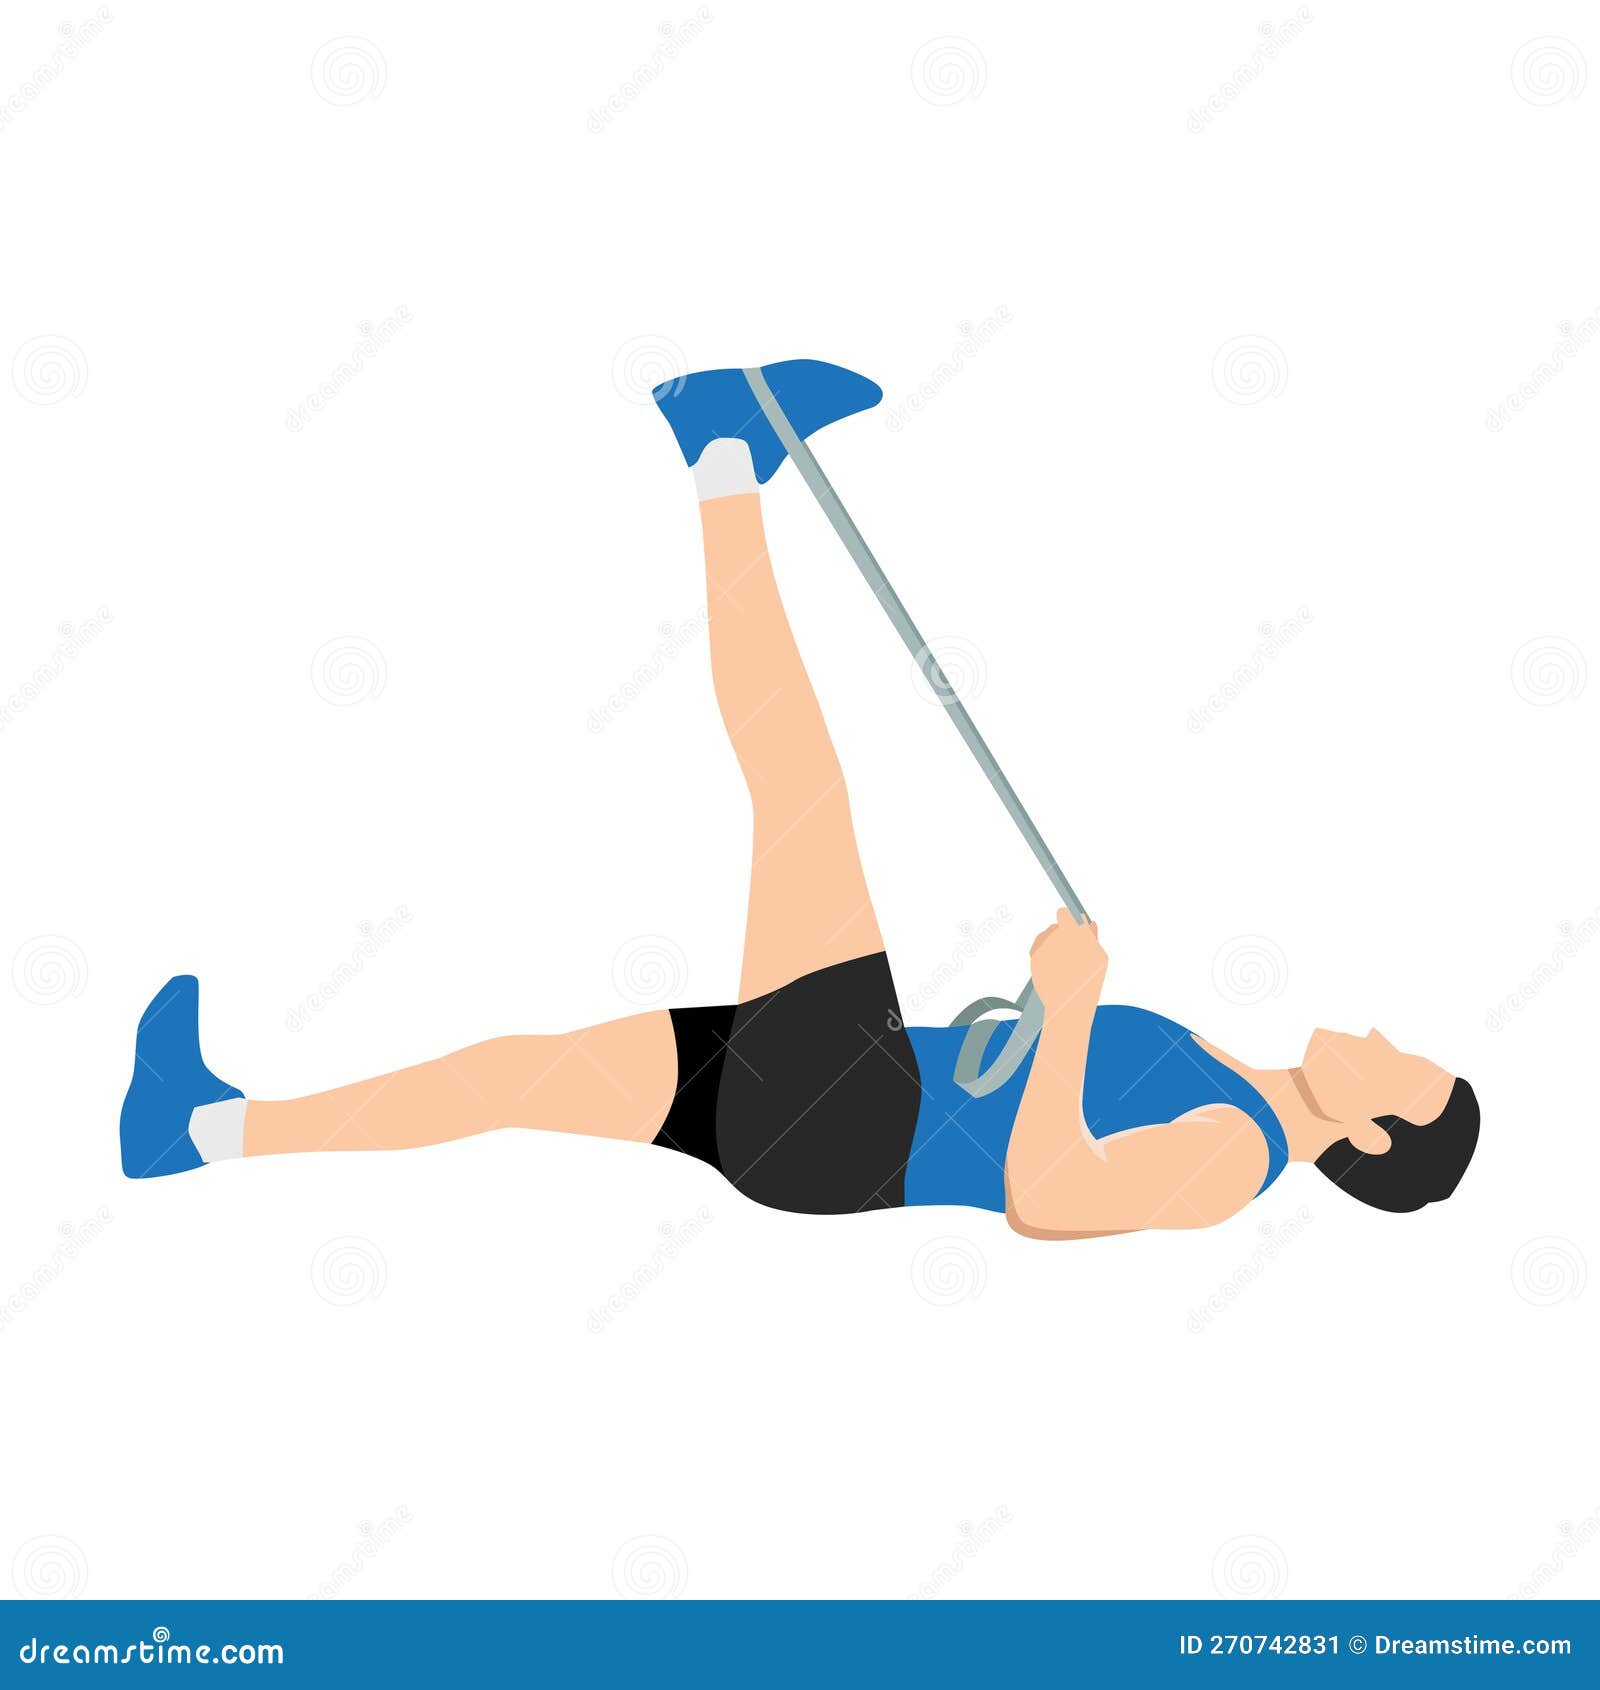 man doing hamstring stretch with elastic band exercise